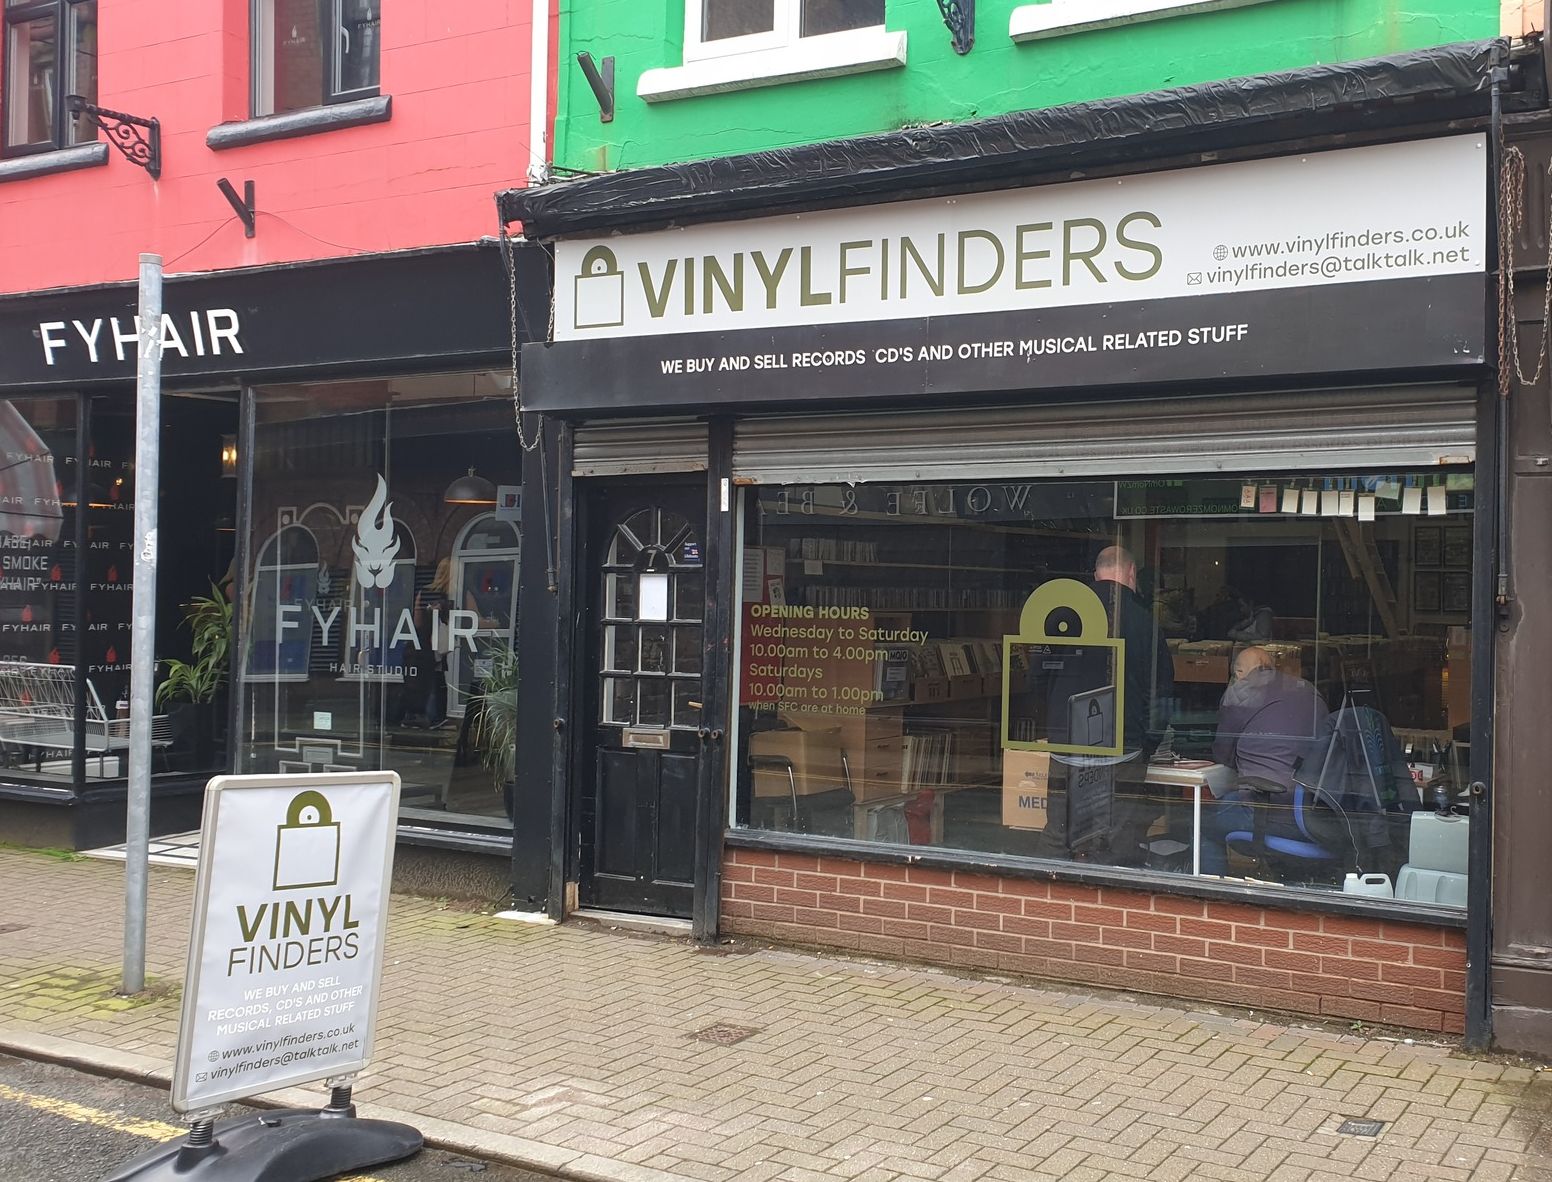 The Vinyl Finders shop on Wesley Street in Southport. Photo by Tony Wynne